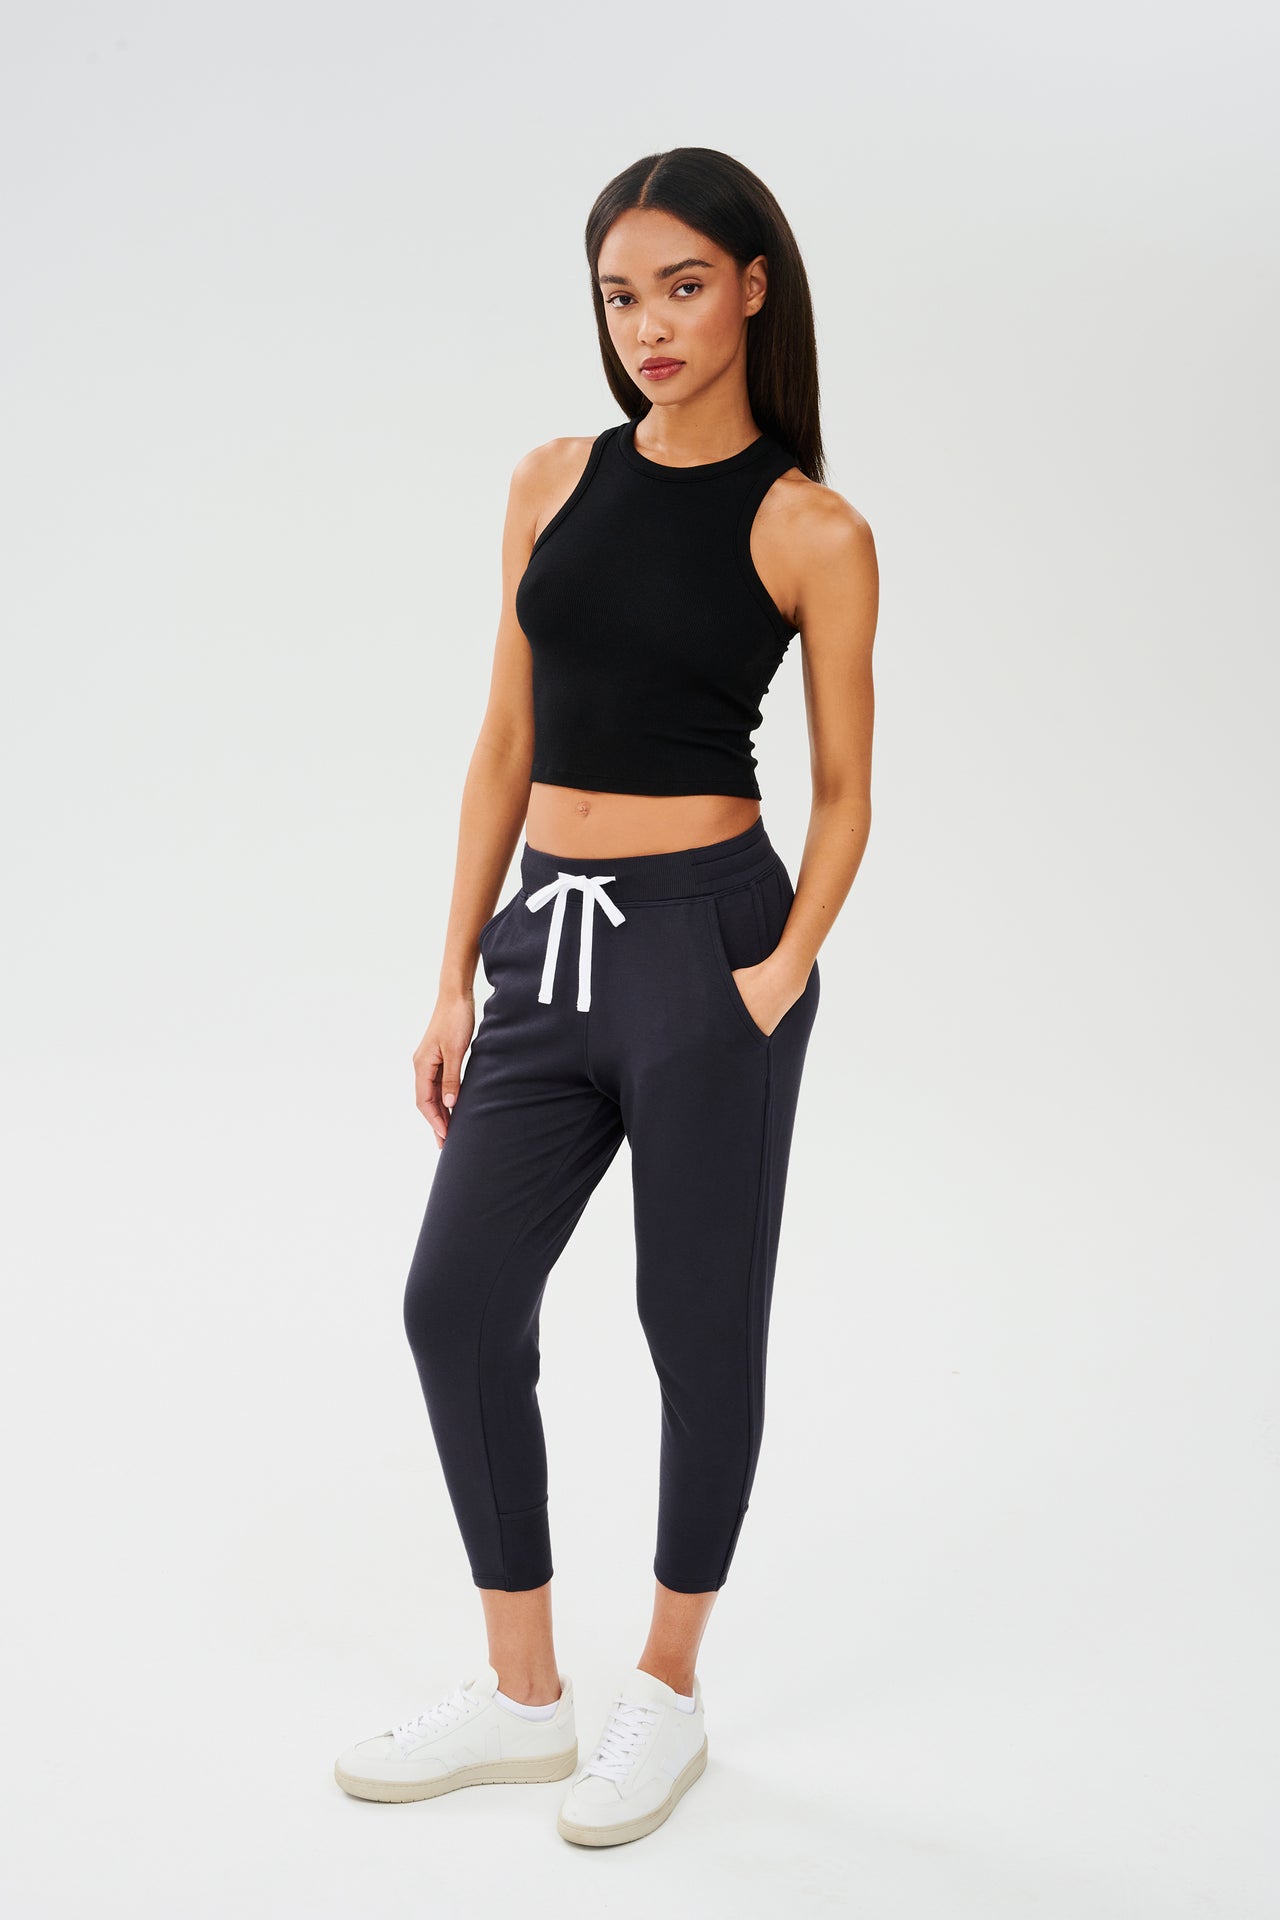 The model is wearing a SPLITS59 Kiki Rib Crop Tank - Black made of soft fabric and black joggers, perfect for gym workouts.